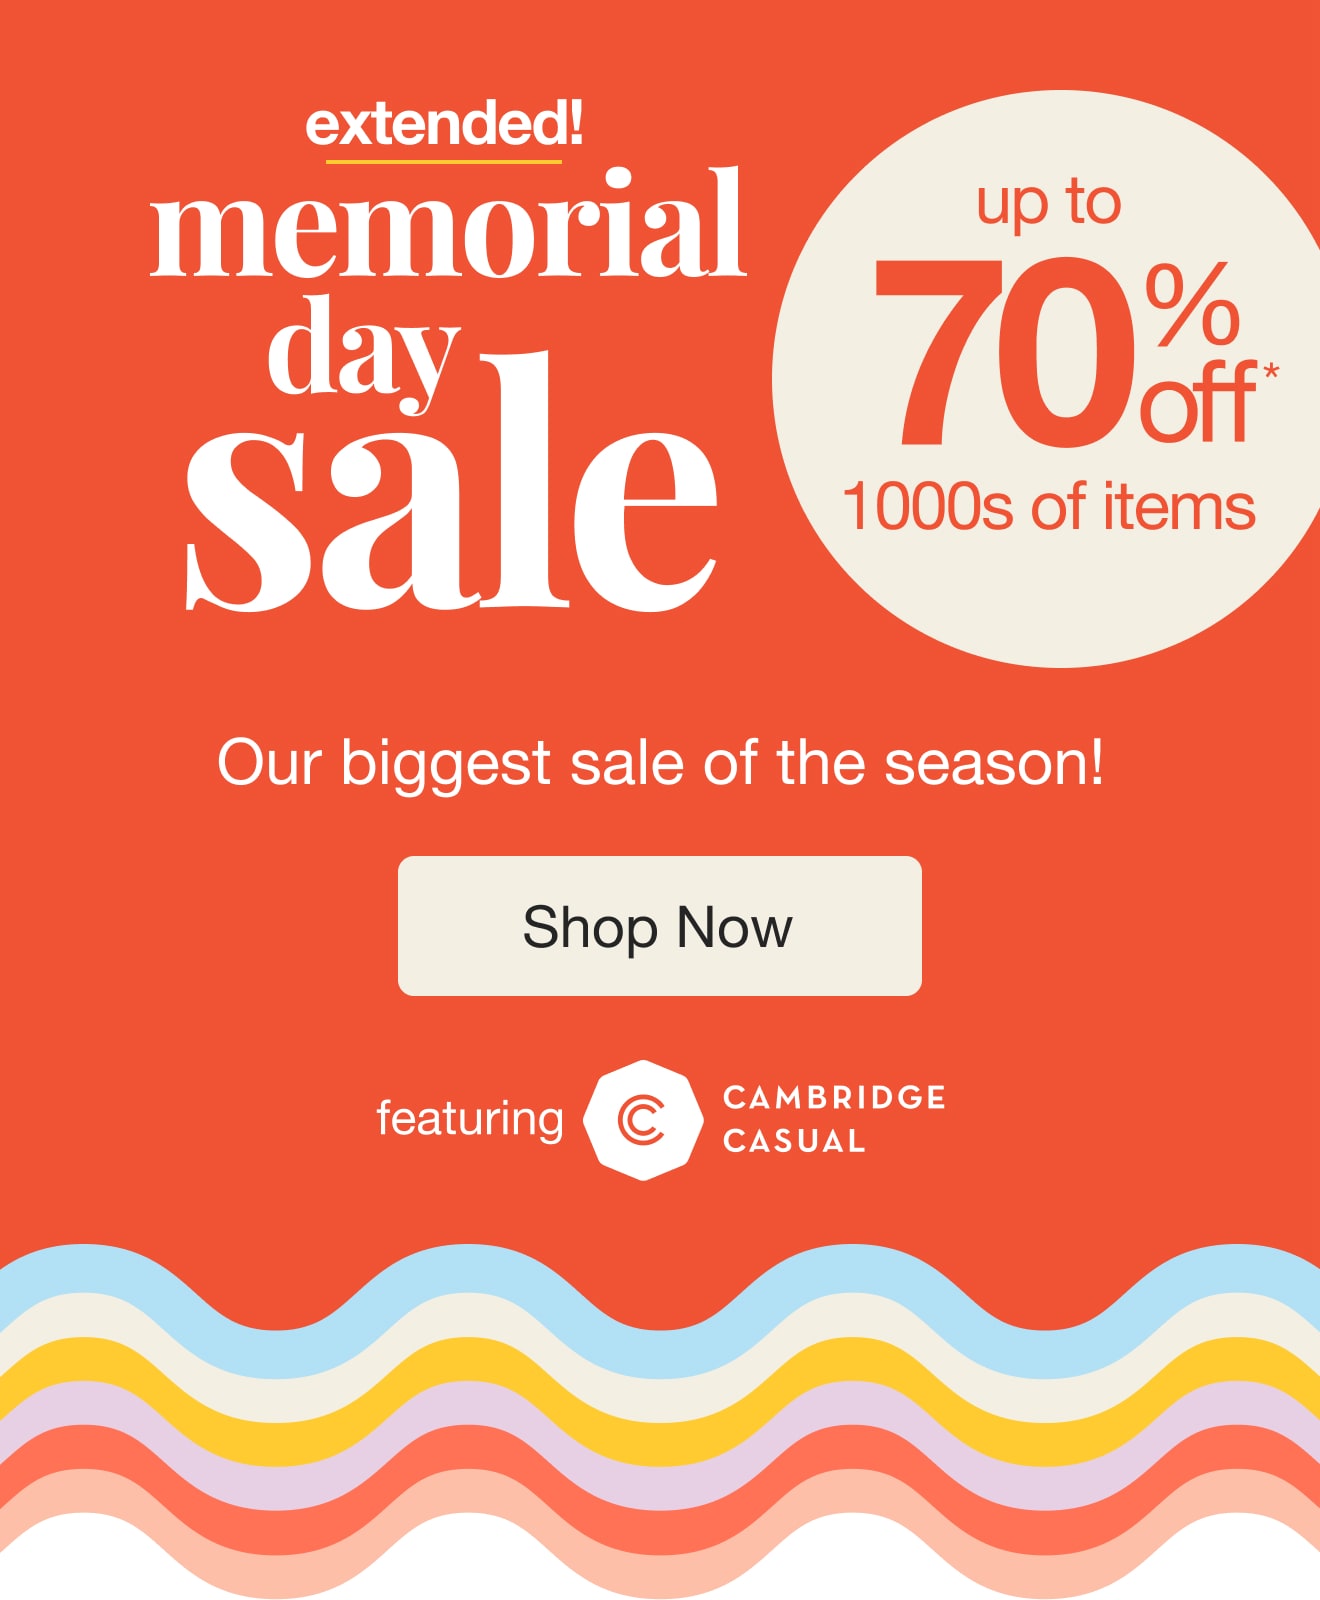 Memorial Day Sale Extended - Shop Now!